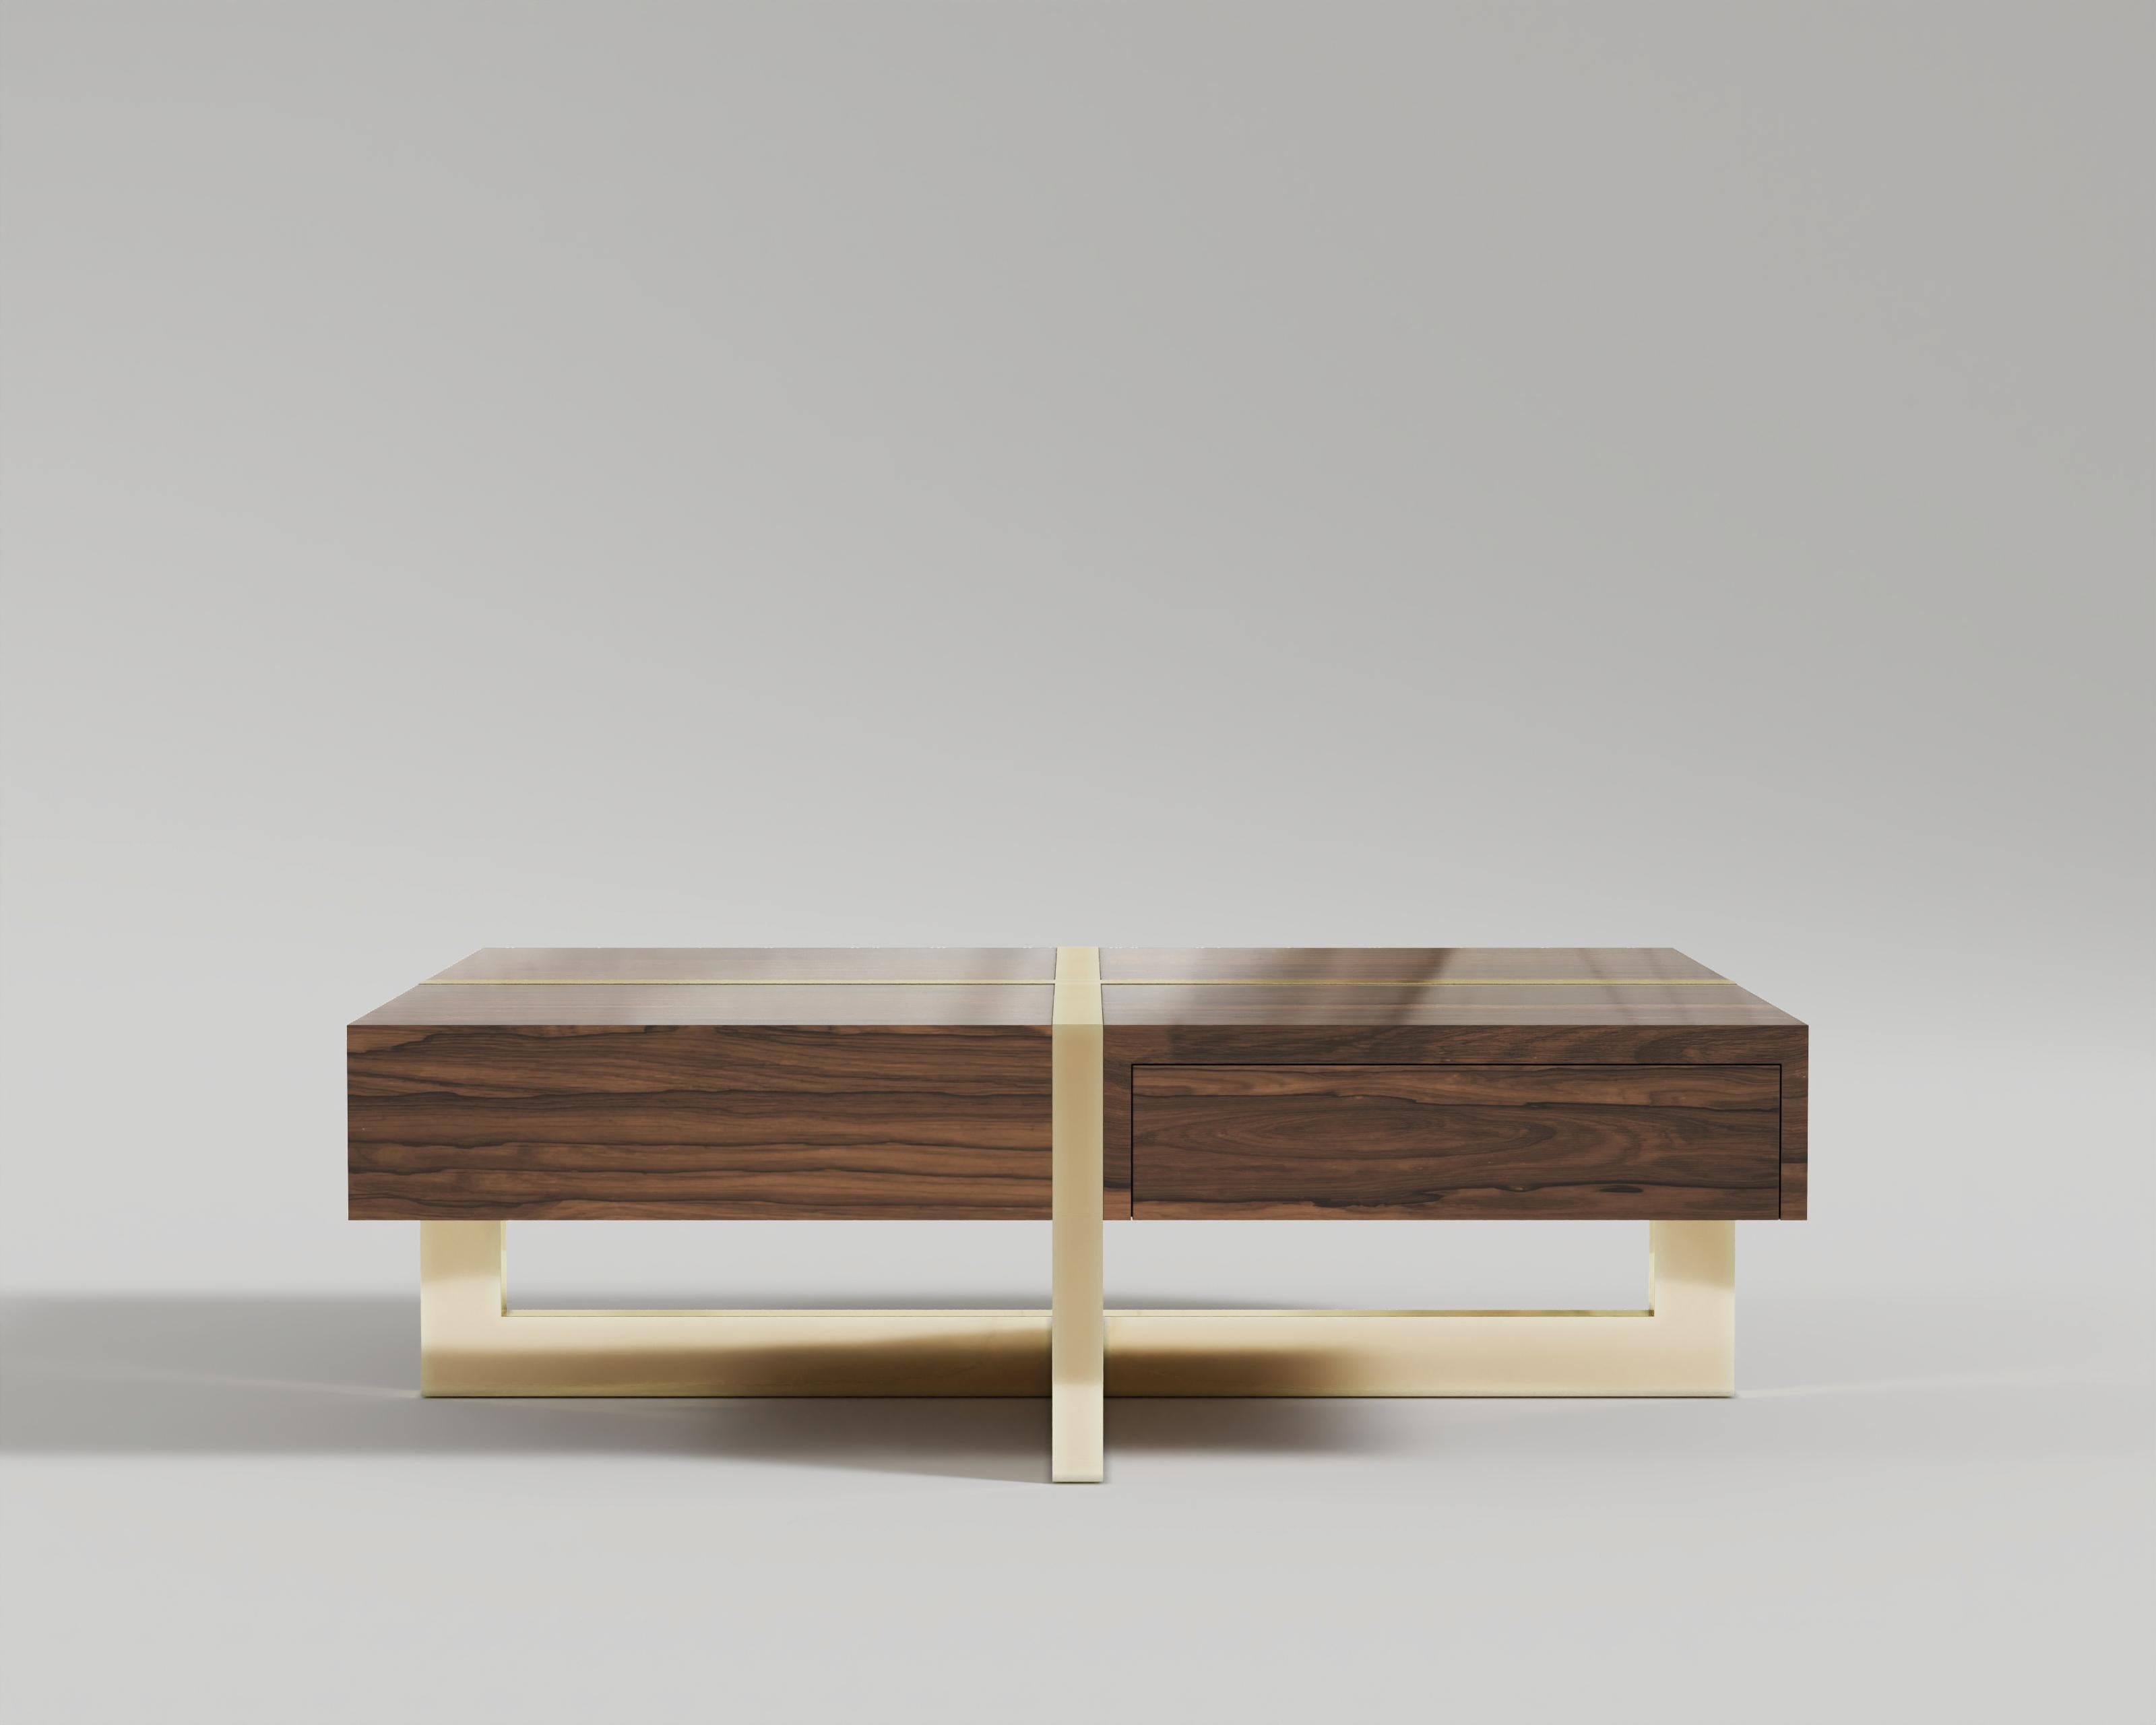 Majoré Coffee Table
Majoré coffee table consists of high gloss walnut and polished bronze with drawers at every angle which makes it so practical.

Materials and sizes are customizable upon the customer's personal request.

Designed by Palena